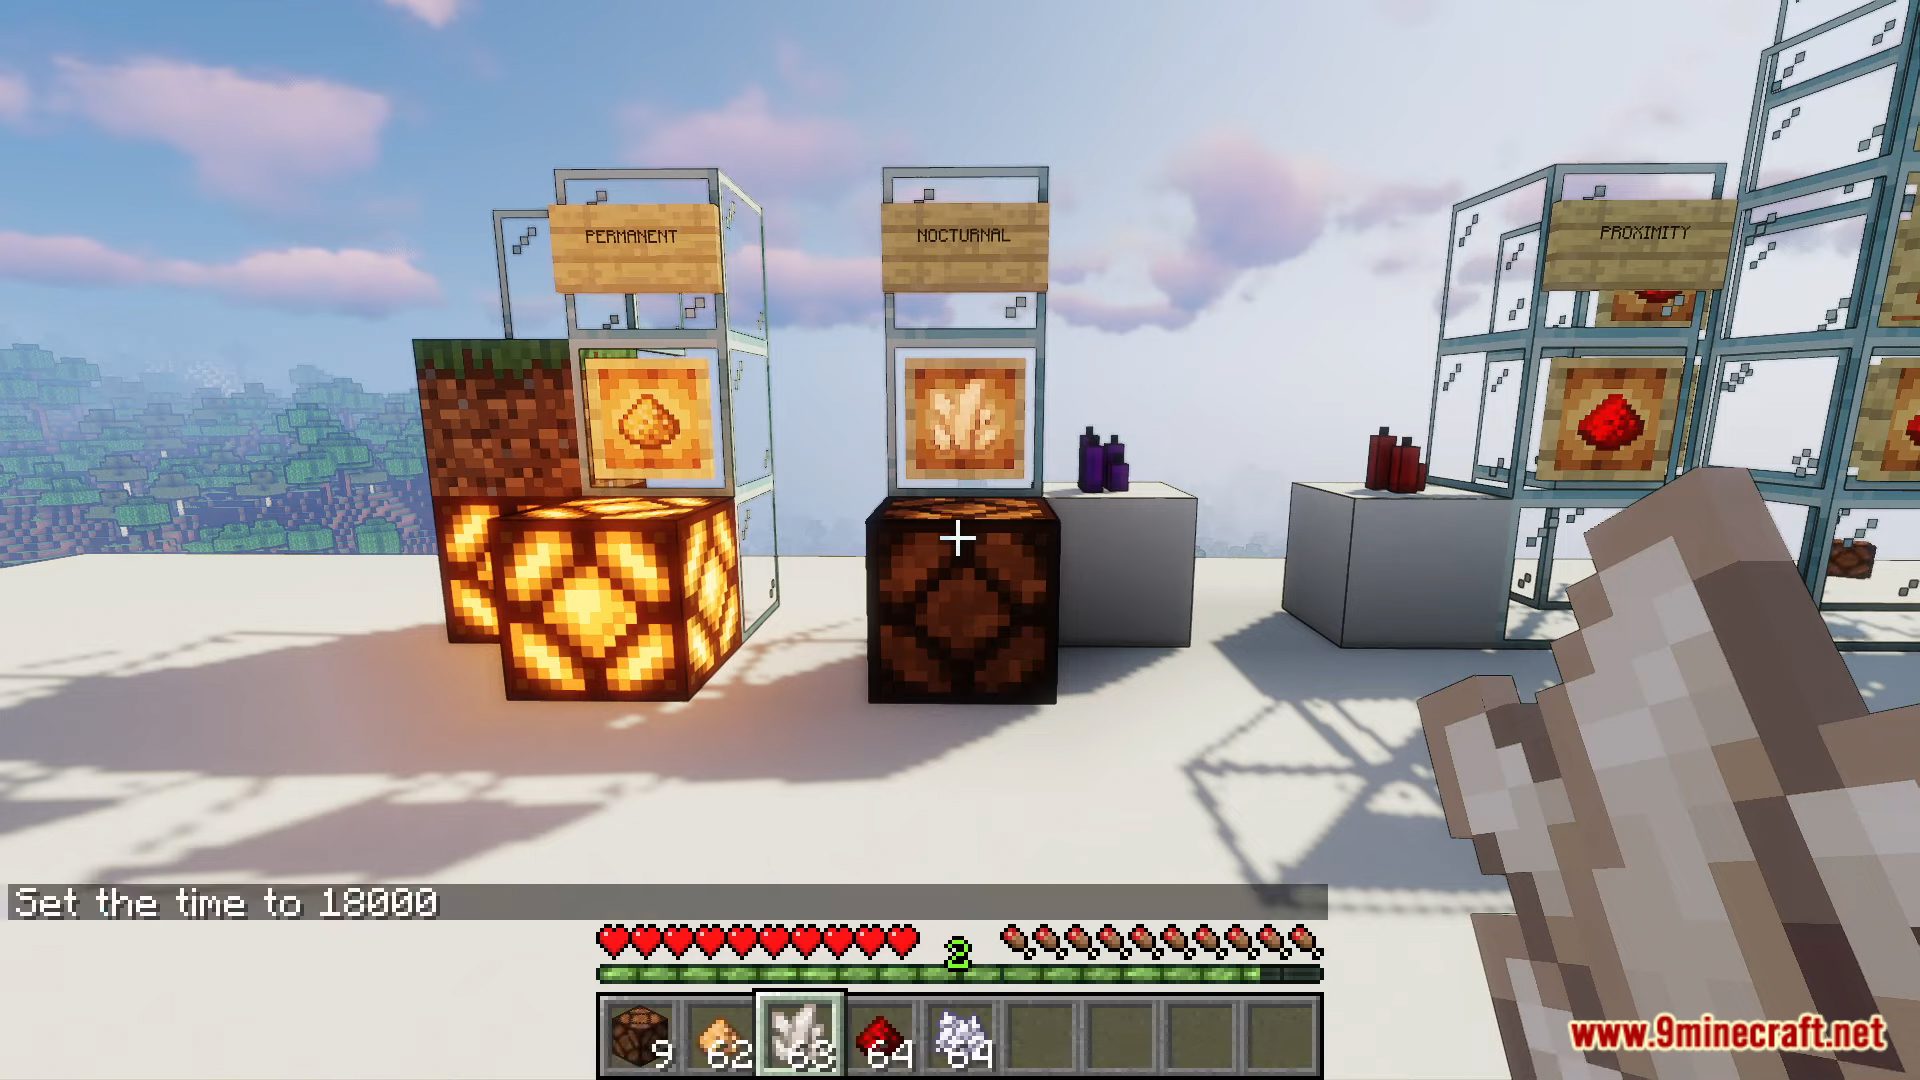 Automatic Lights Data Pack (1.19.4, 1.19.2) - Light Your Way! 8